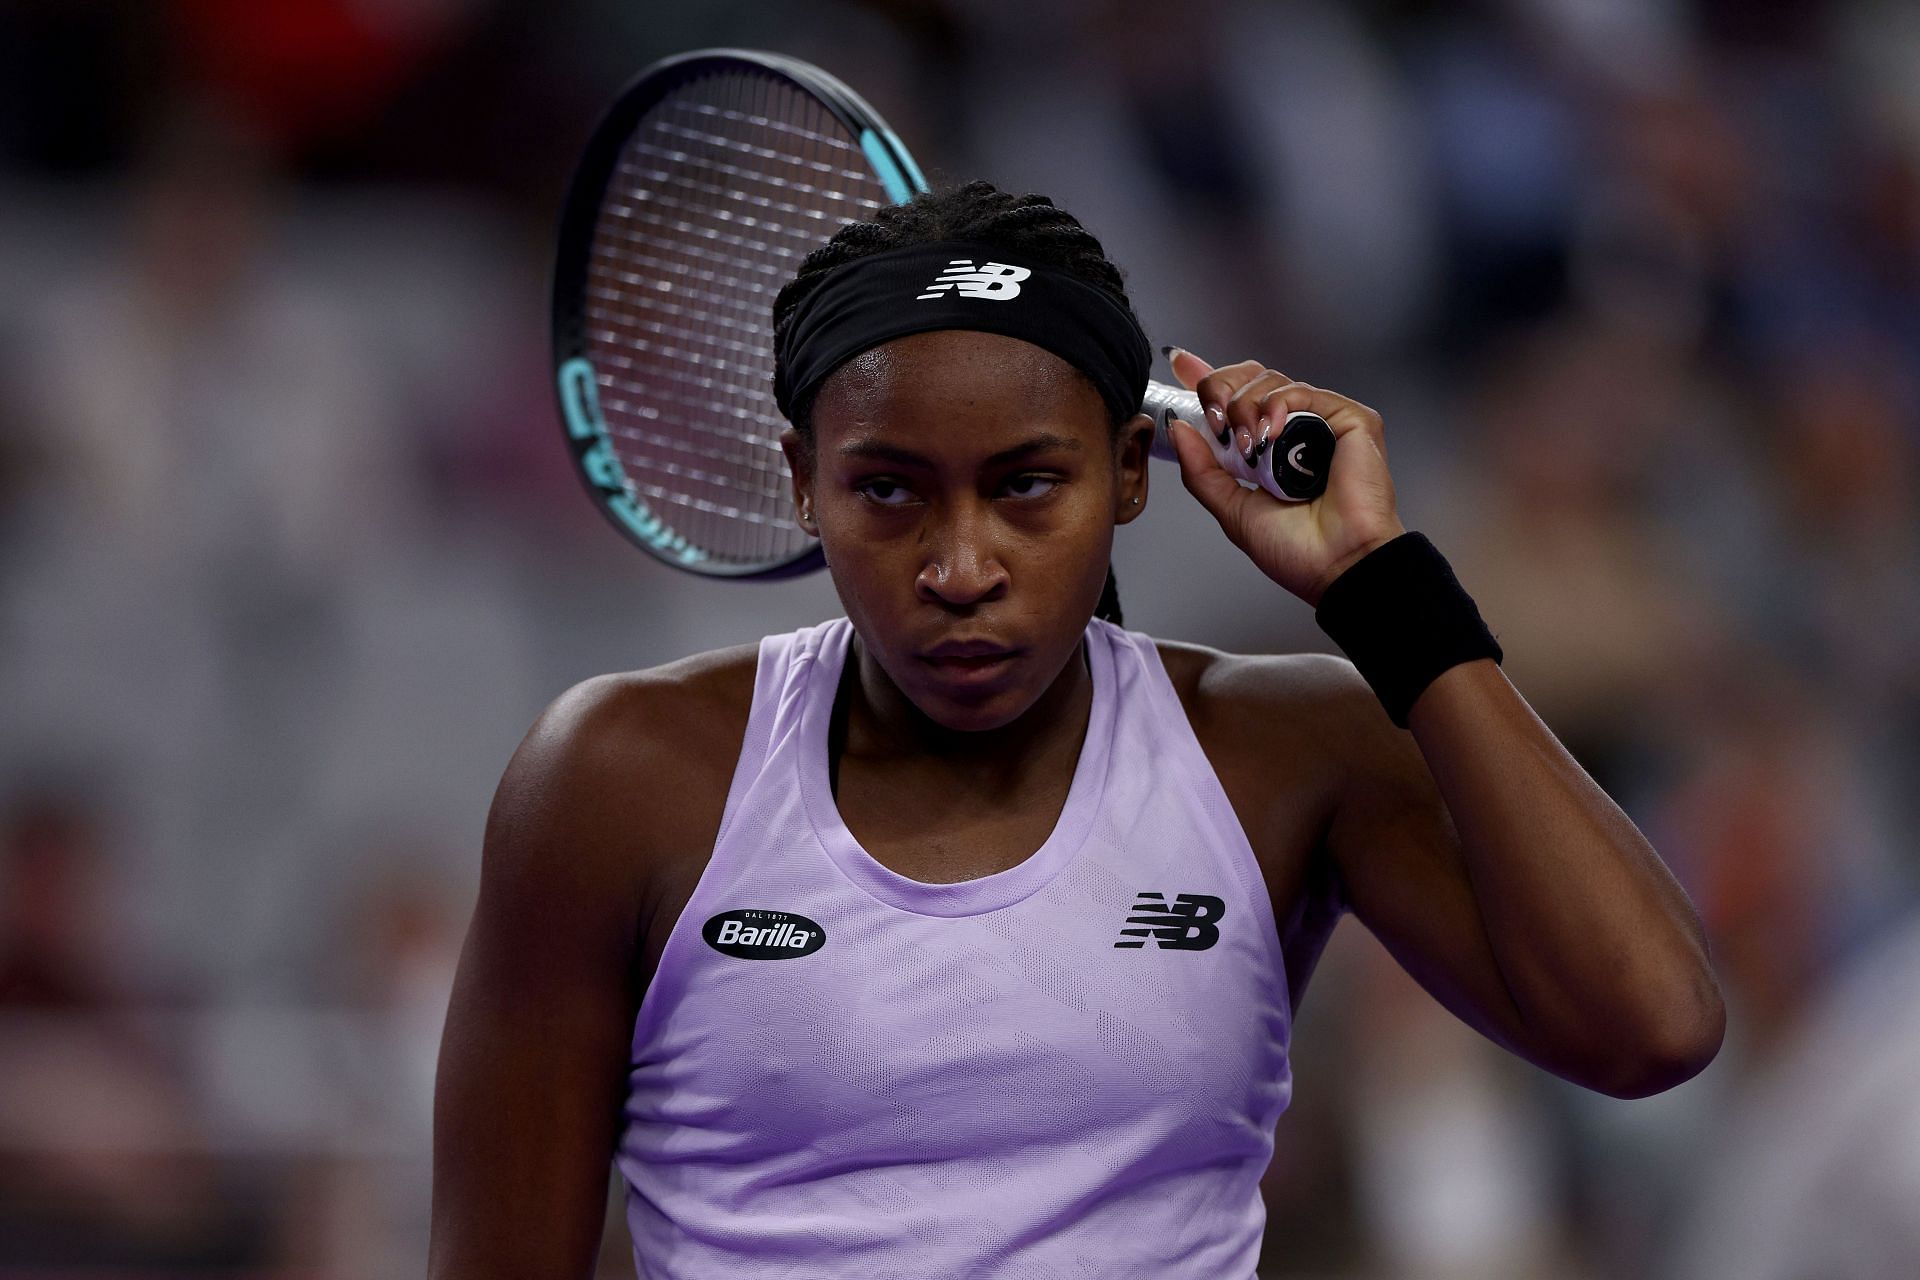 Coco Gauff at the 2022 WTA Finals - Day 6.